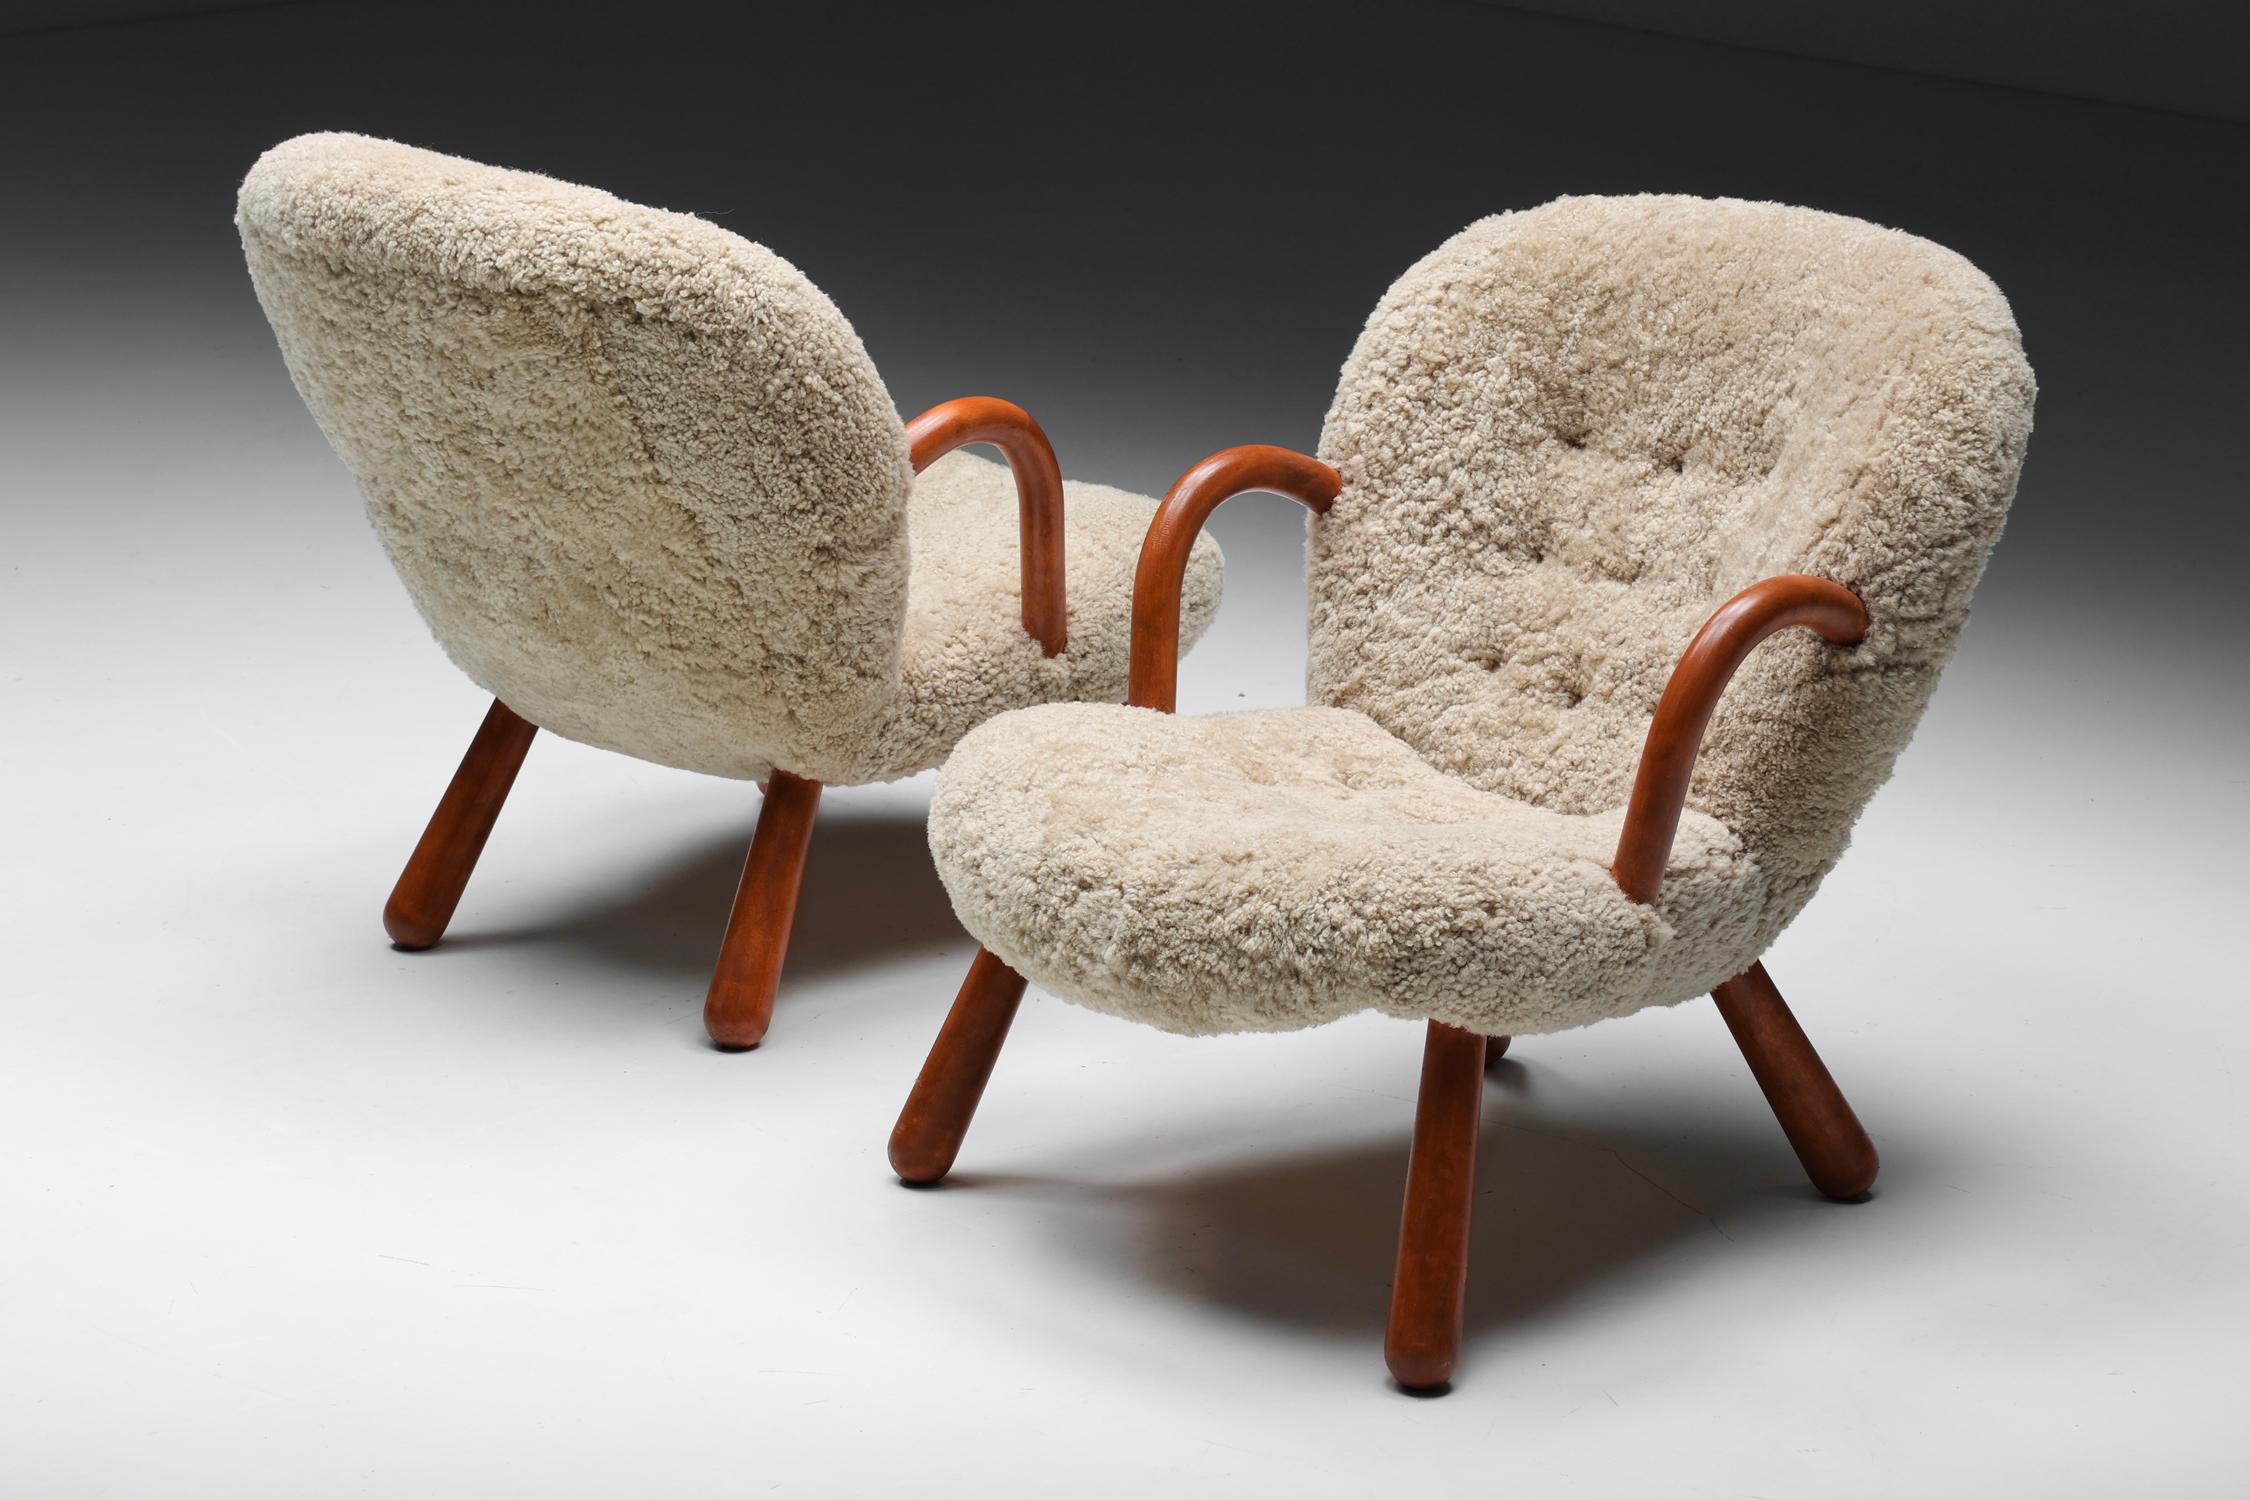 Arctander clam chair in Sheepskin by Philip Arctander, Denmark, 1944

The Arctander clam chair, also known as the “Muslingestol”, is easily recognizable by its rounded arms, club-shaped legs, and curved, slightly tilted backrest upholstered in the